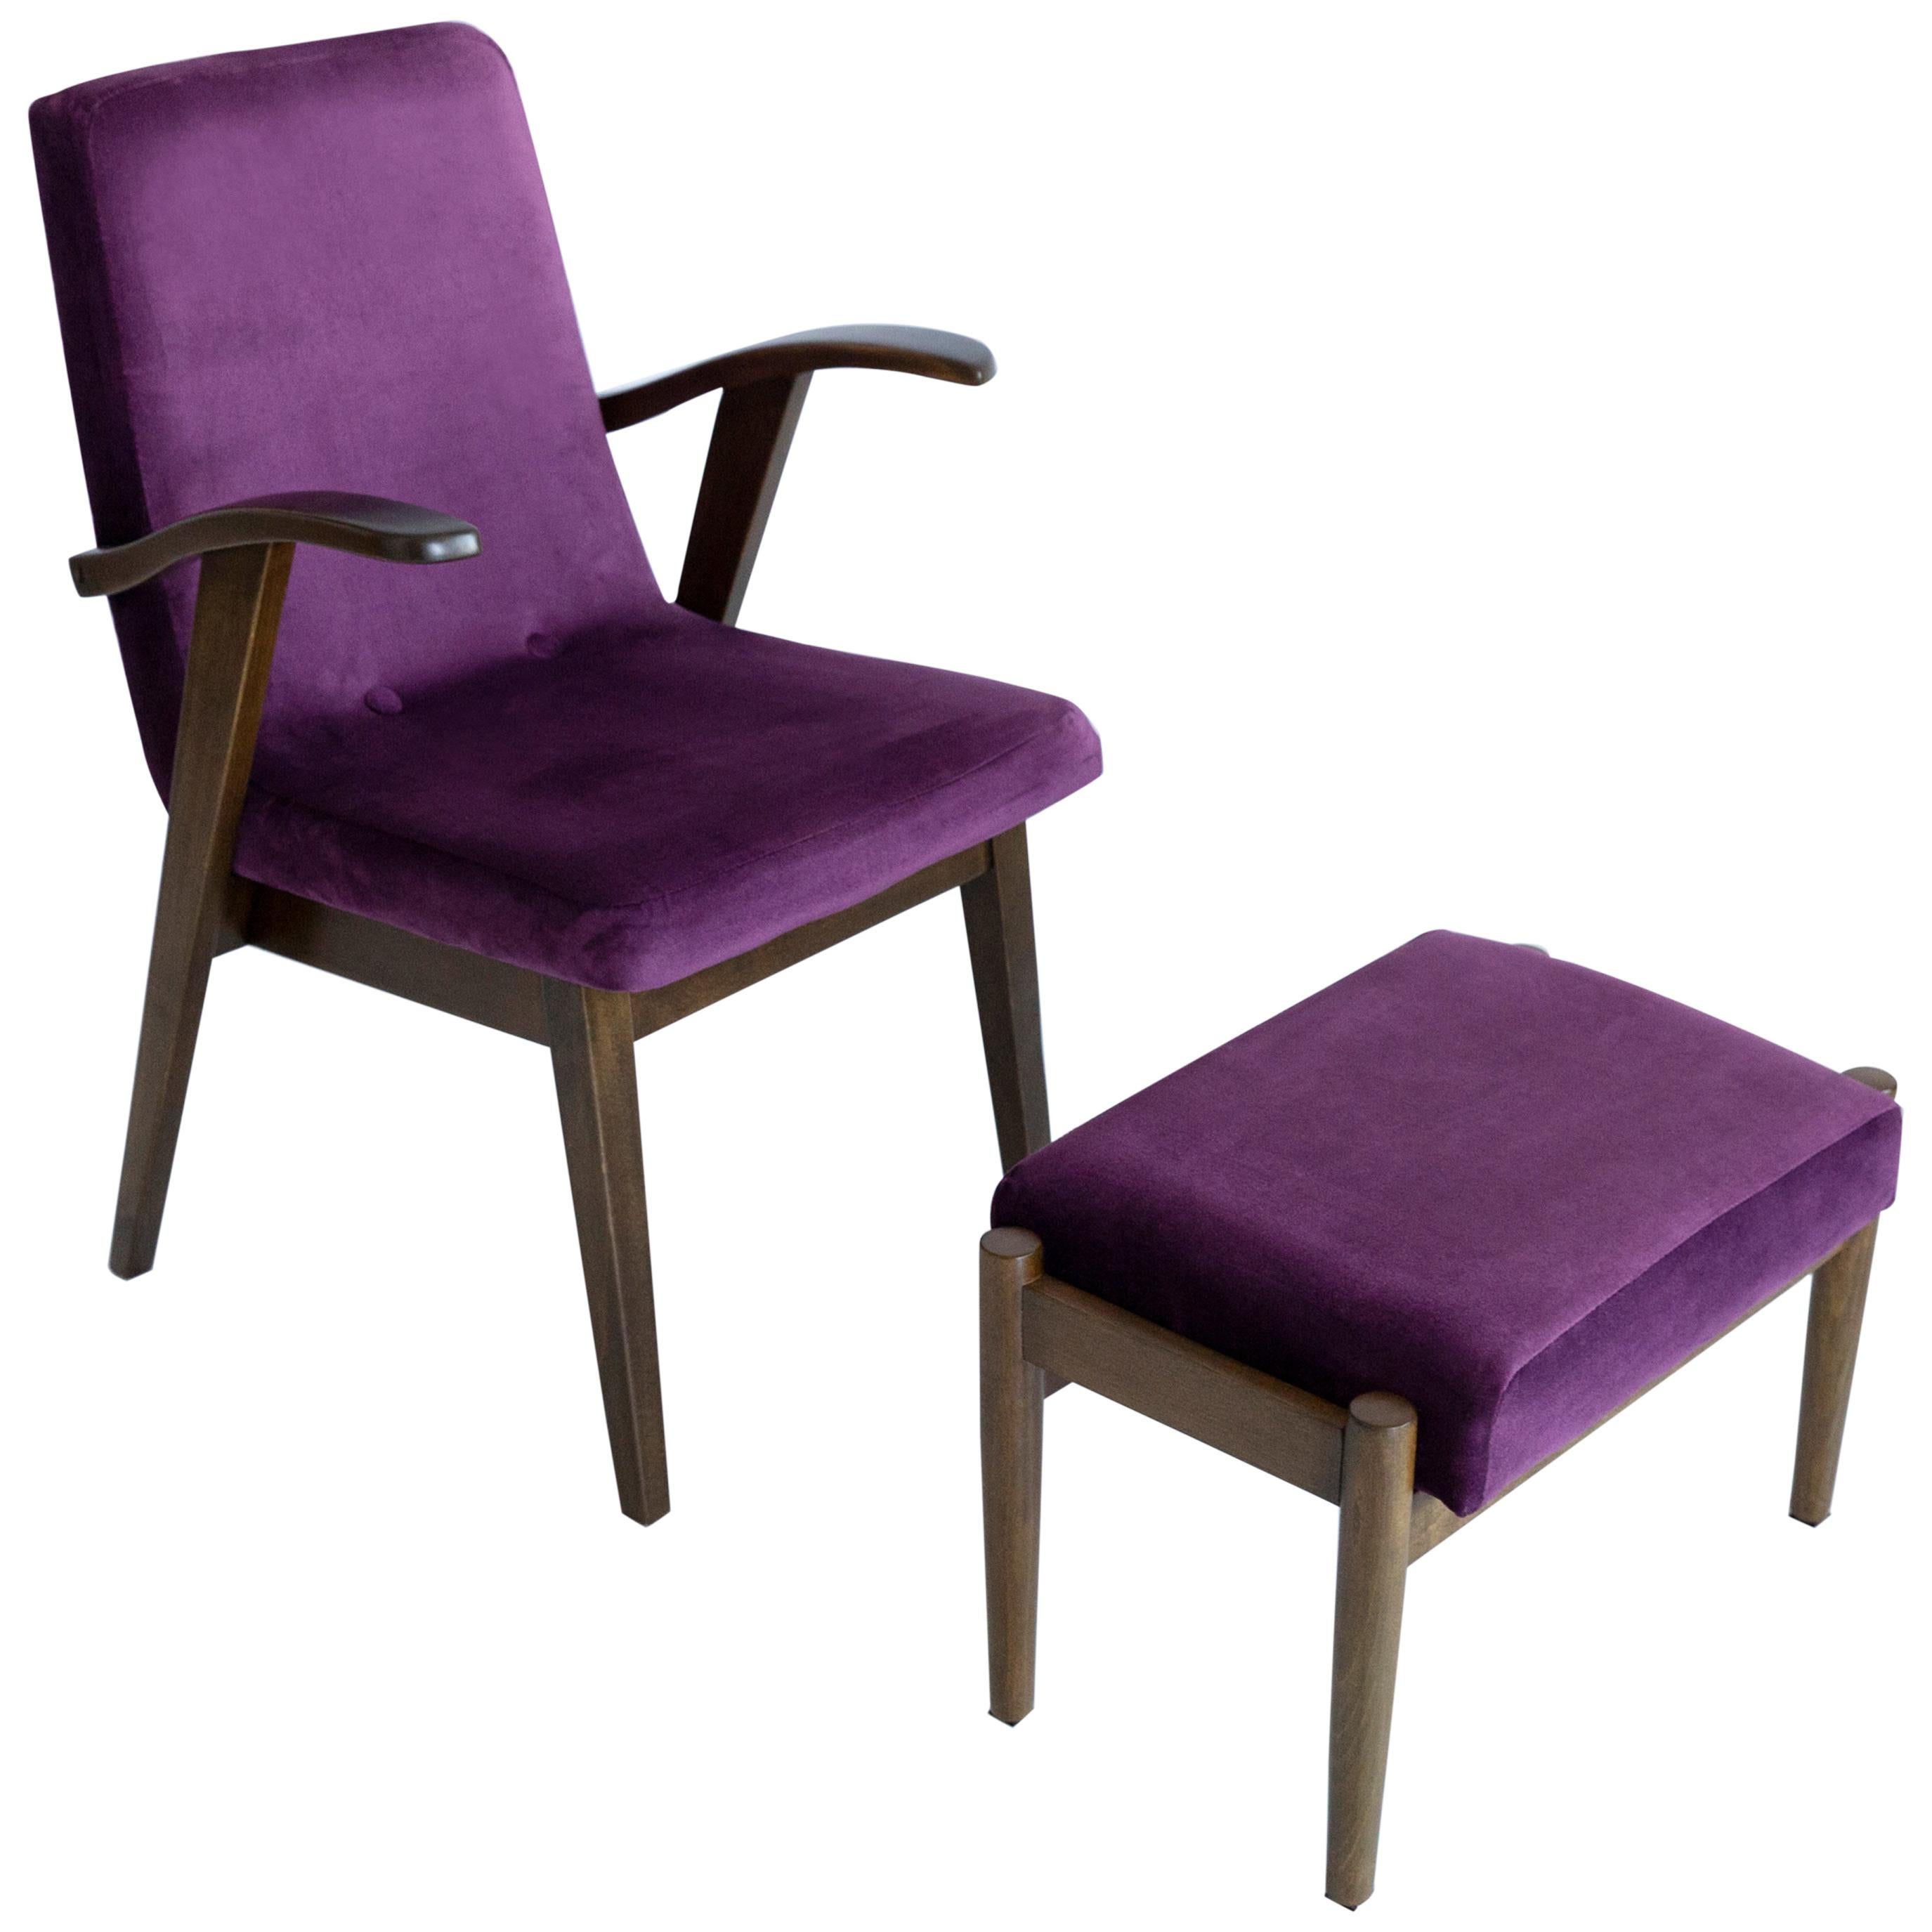 20th Century Vintage Plum Violet Armchair and Stool by Mieczyslaw Puchala, 1960s